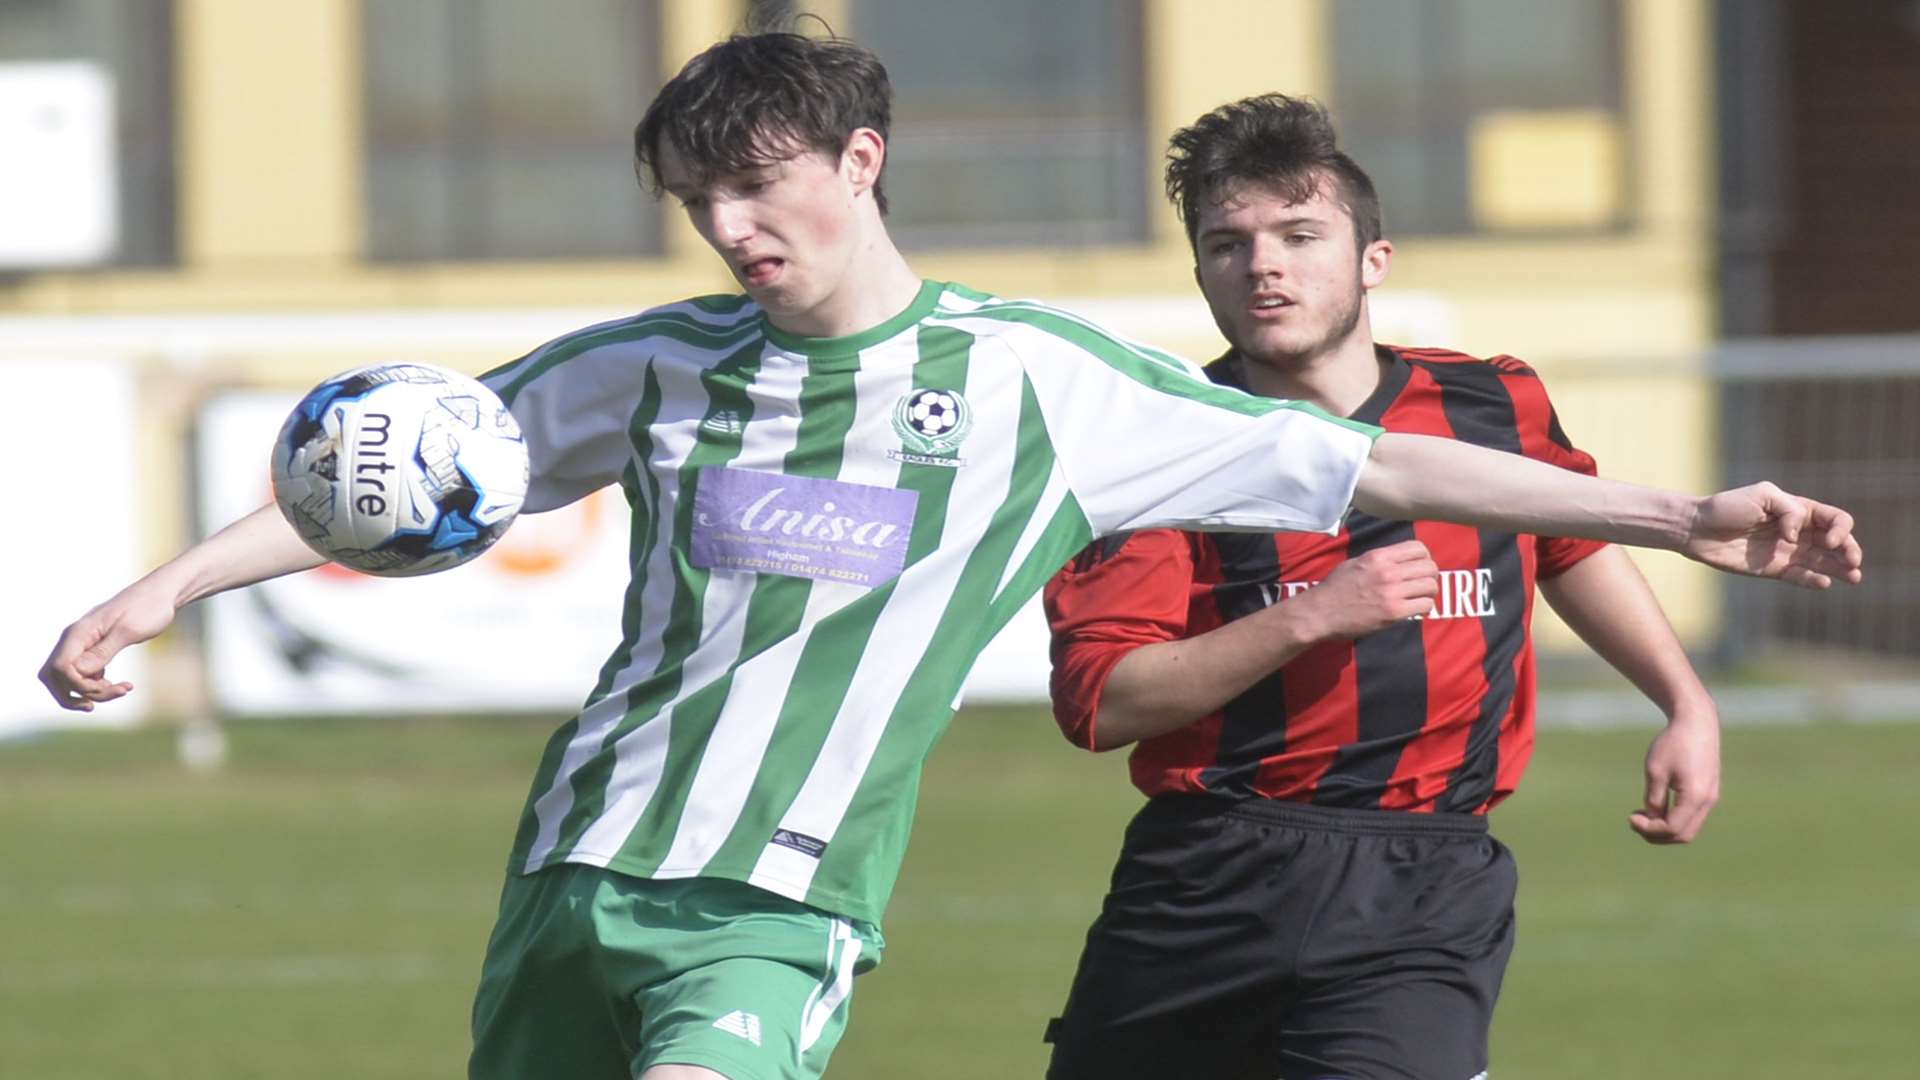 Eagles under-18s (green) get to the ball ahead of Woodcoombe Youth in the John Leeds Trophy final Picture: Ruth Cuerden